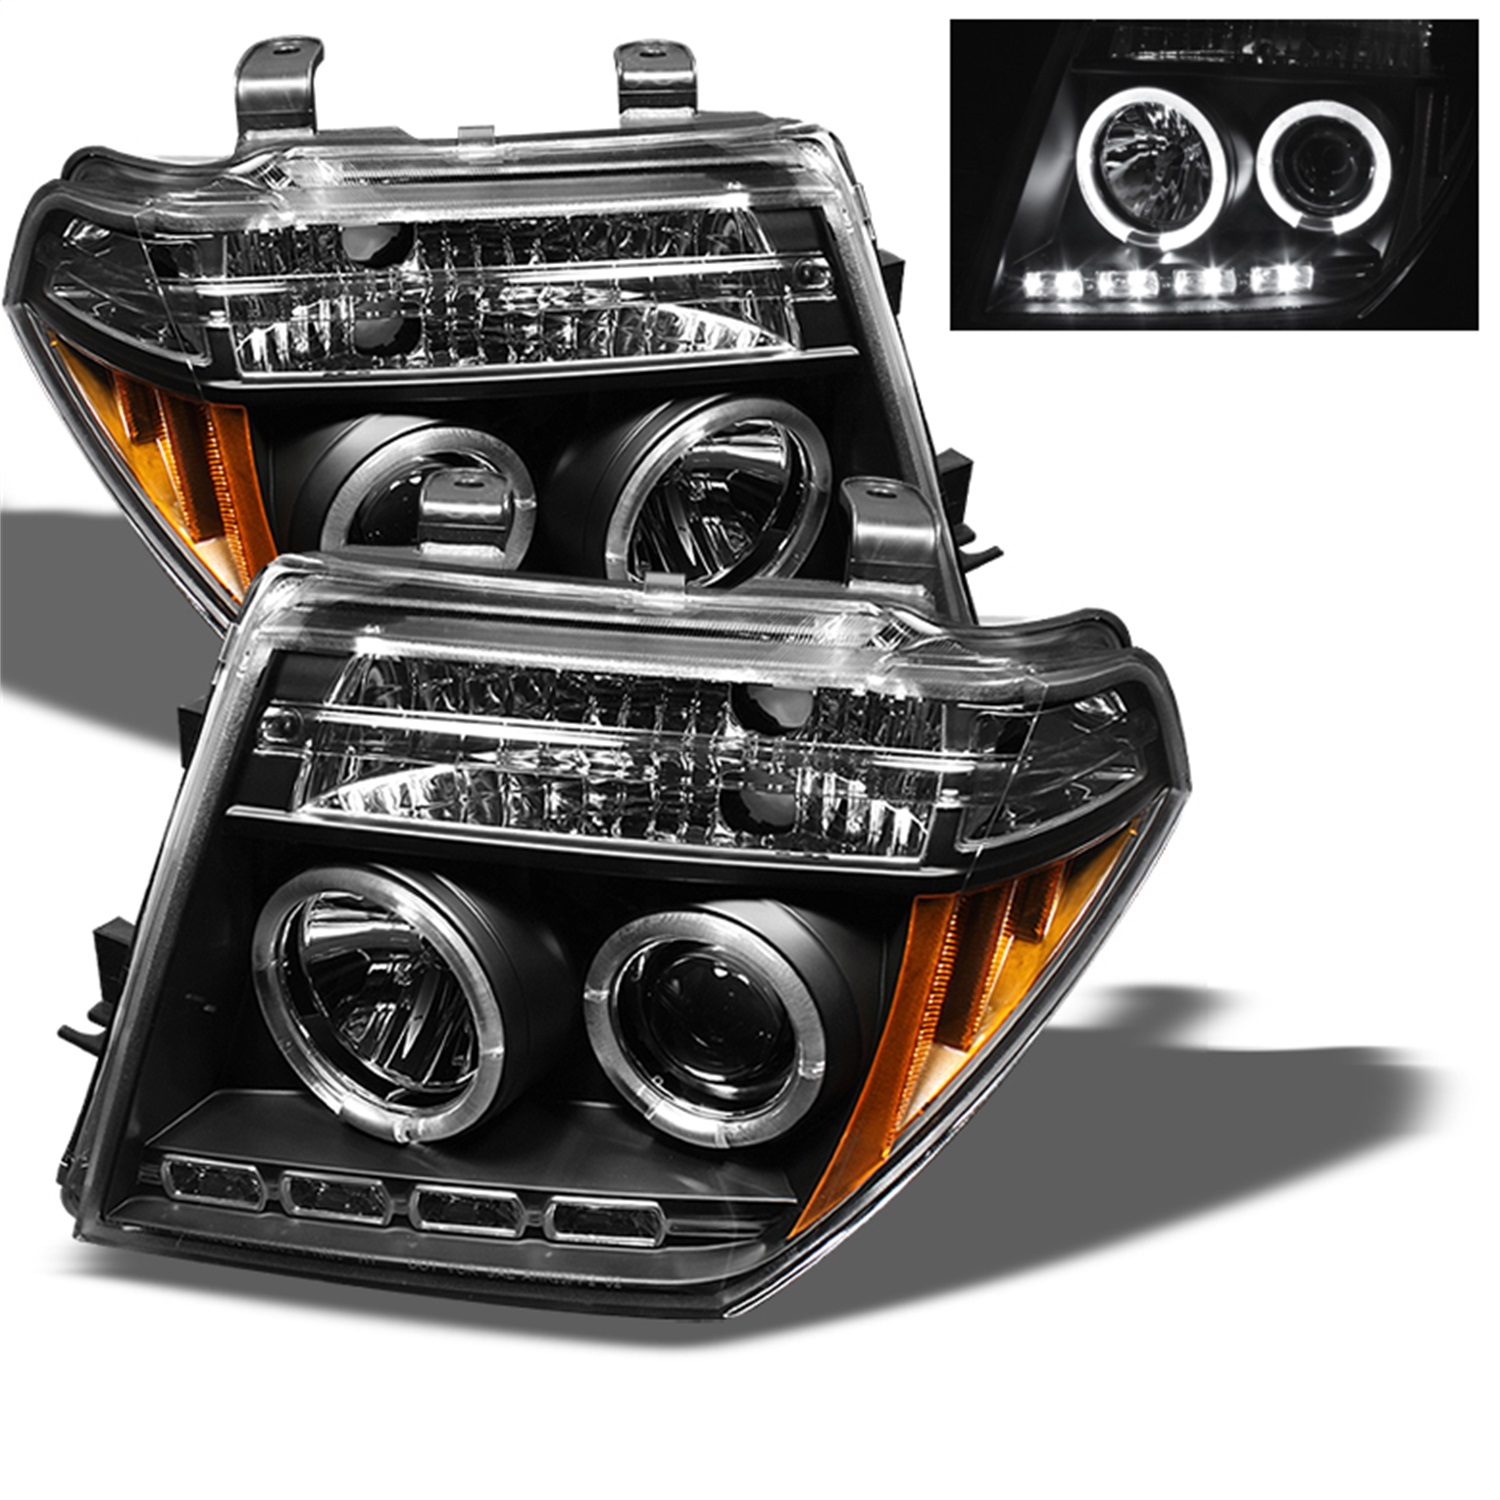 Spyder Auto 5011527 Halo LED Projector Headlights Fits 05-08 Frontier Pathfinder